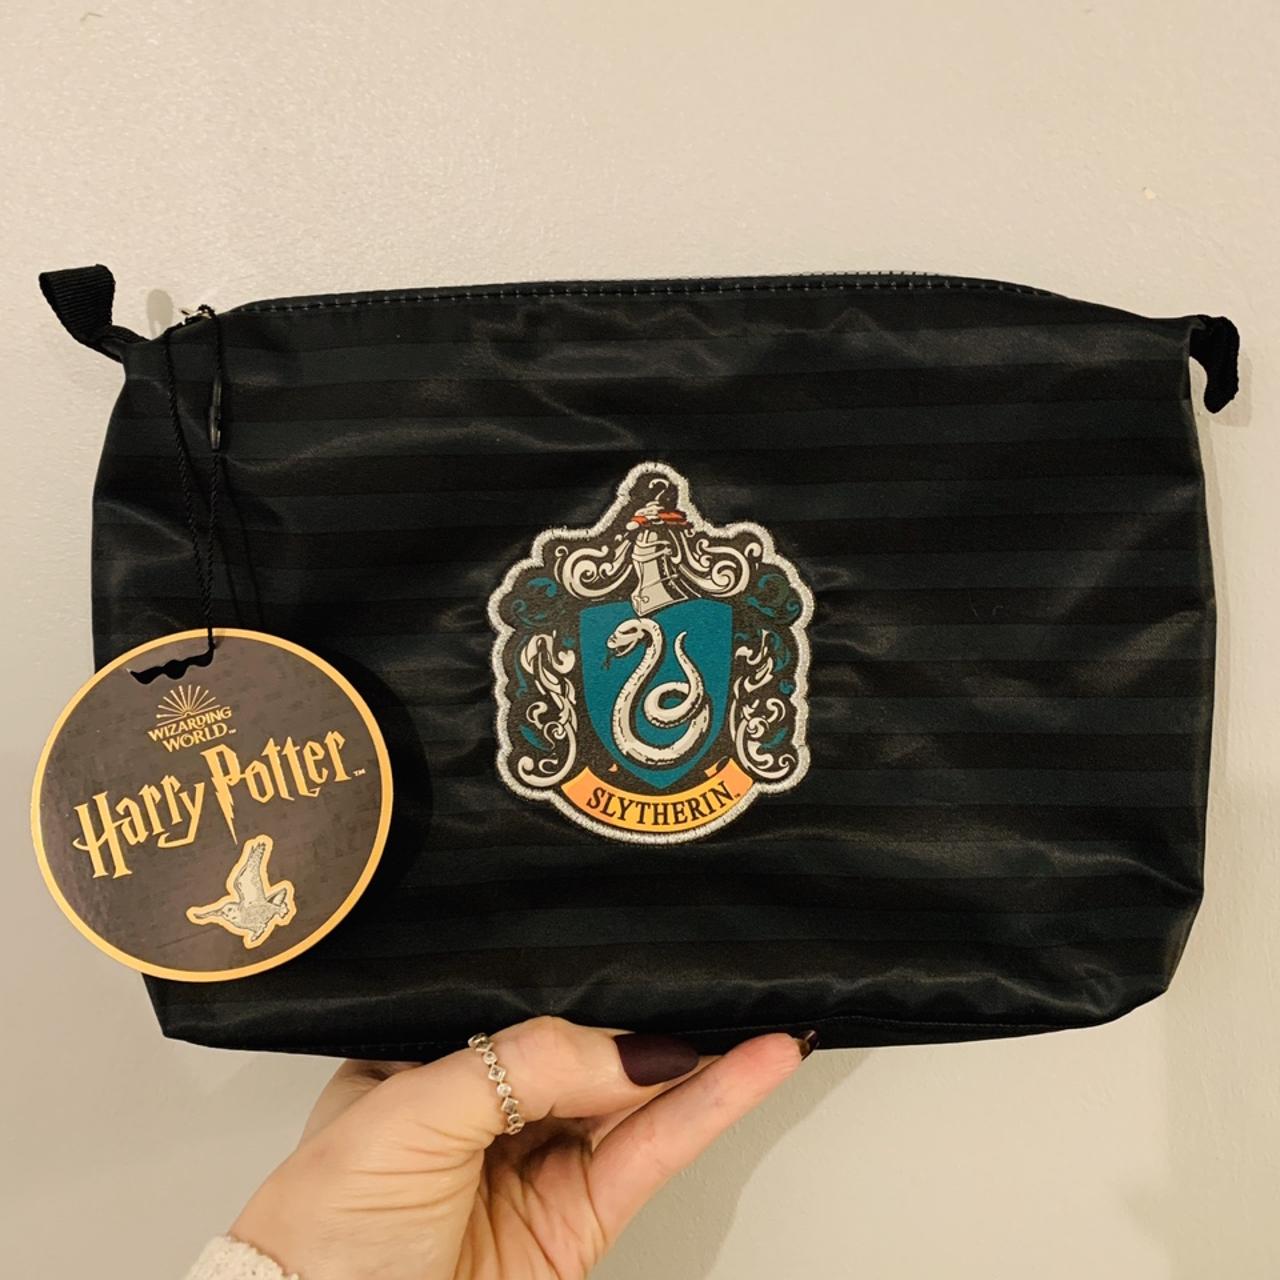 Fashion, Home & Beauty | Harry potter bag, Harry potter, Harry potter  collection